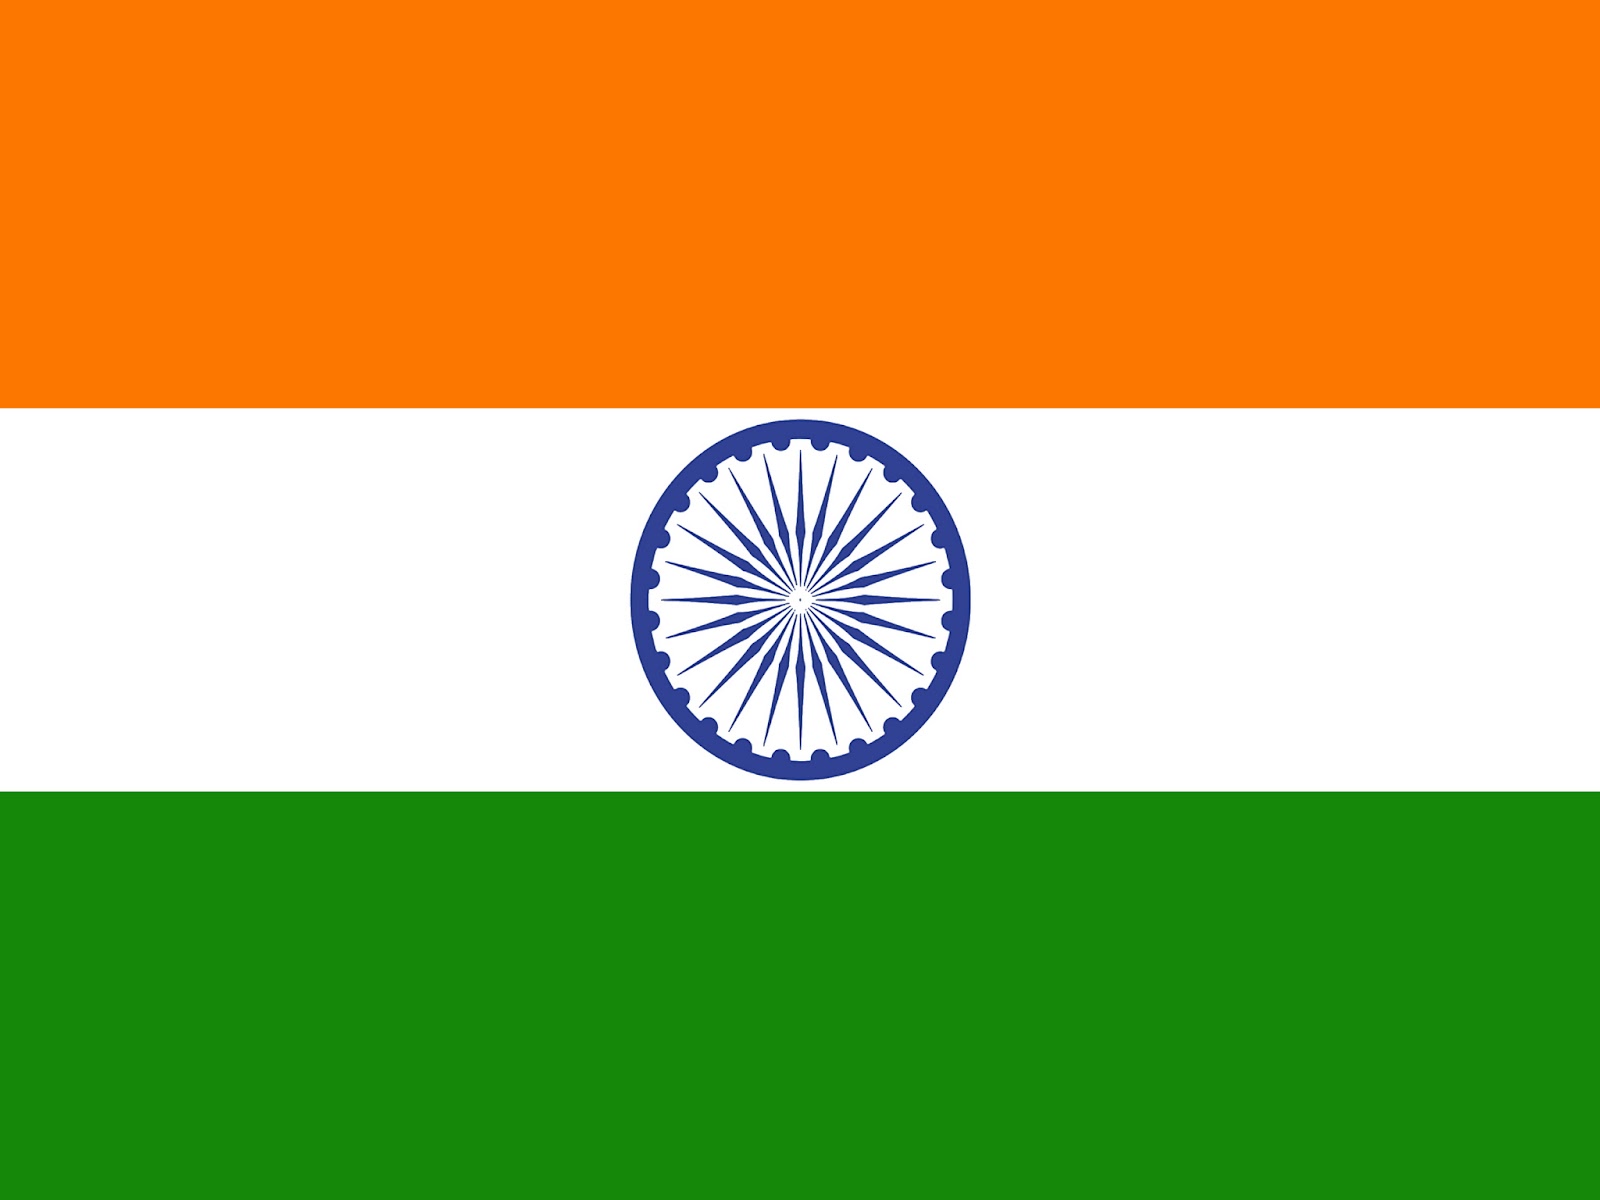 ... free indian flag ipad wallpaper 1024x1024 2048 x 1536 size background